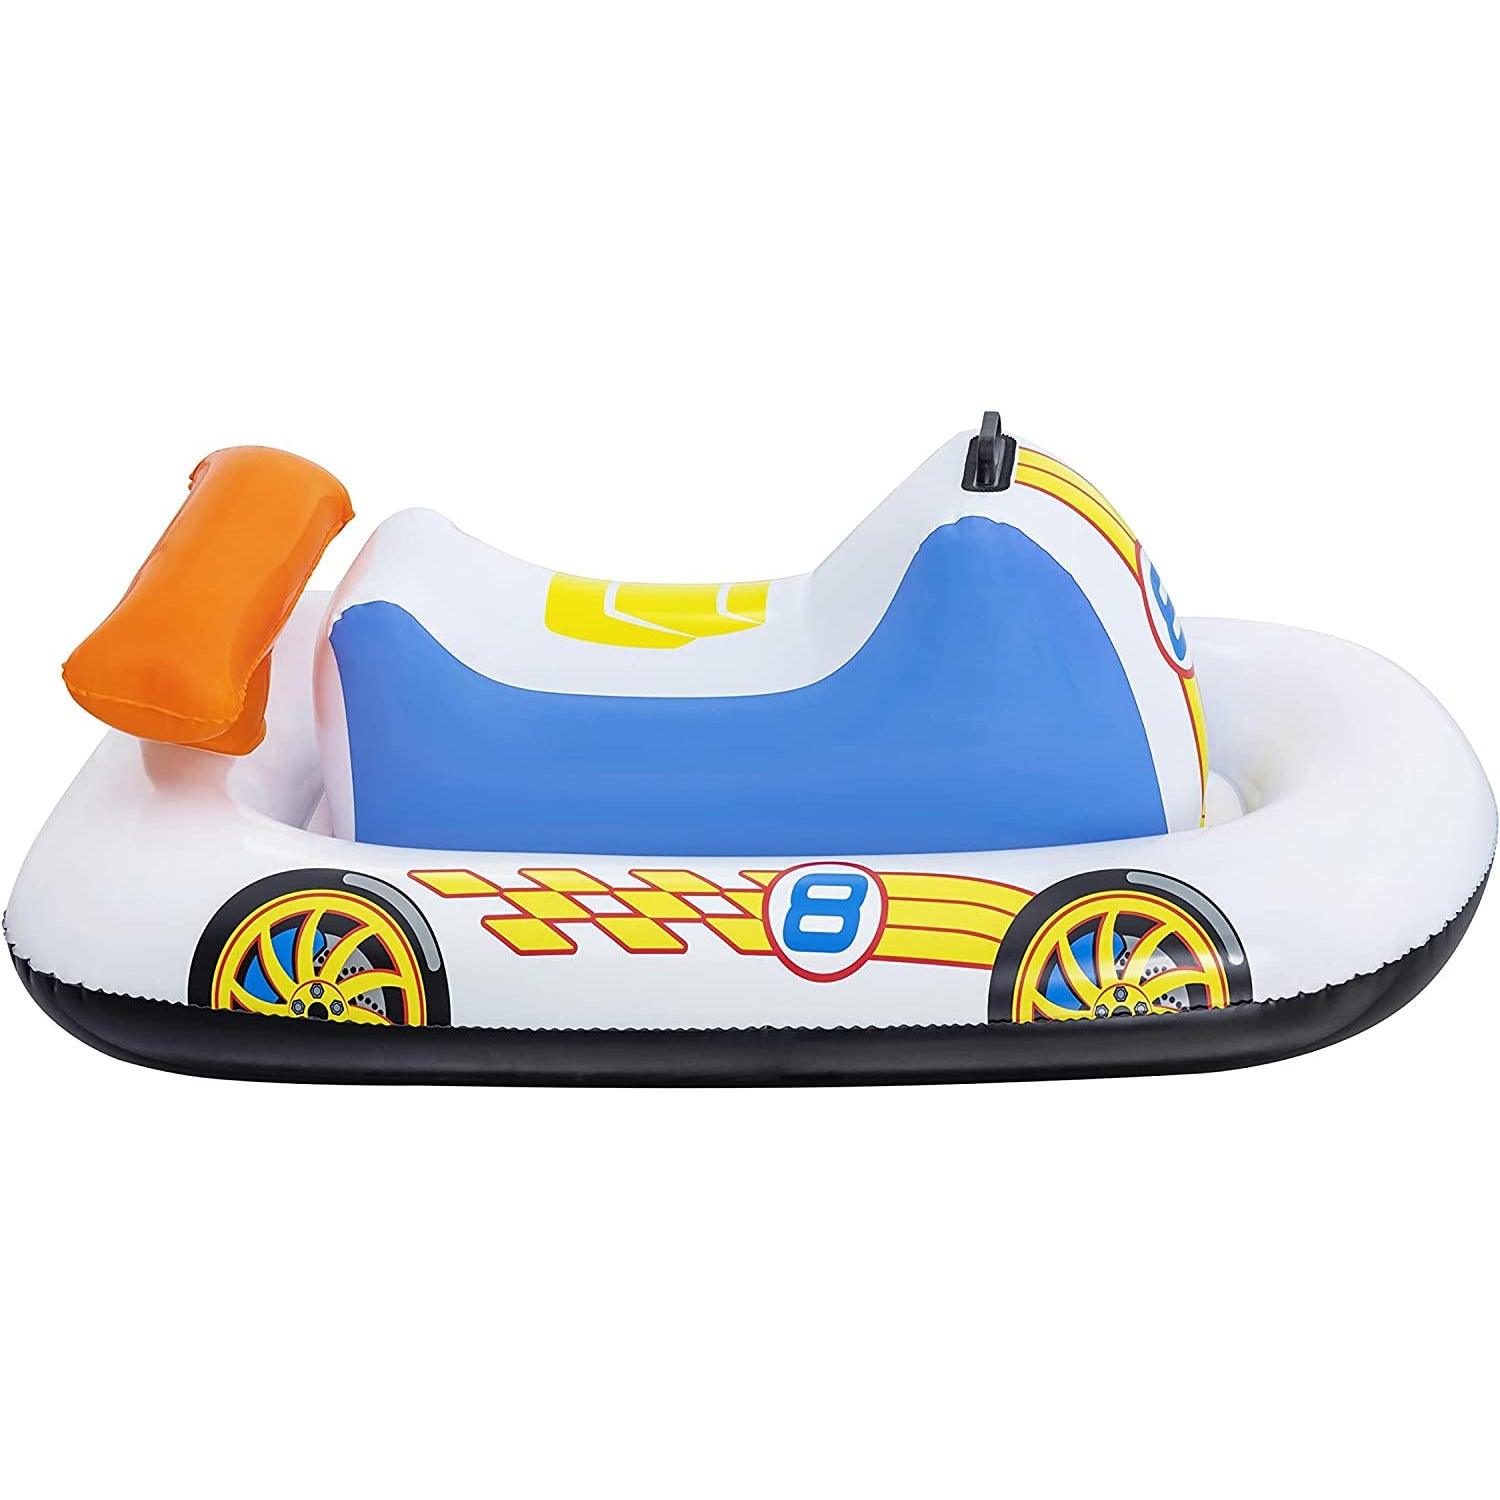 Bestway 41480 Sports Car Ride-On 110X75Cm - BumbleToys - 5-7 Years, Bestway, Boys, Girls, Sand Toys Pools & Inflatables